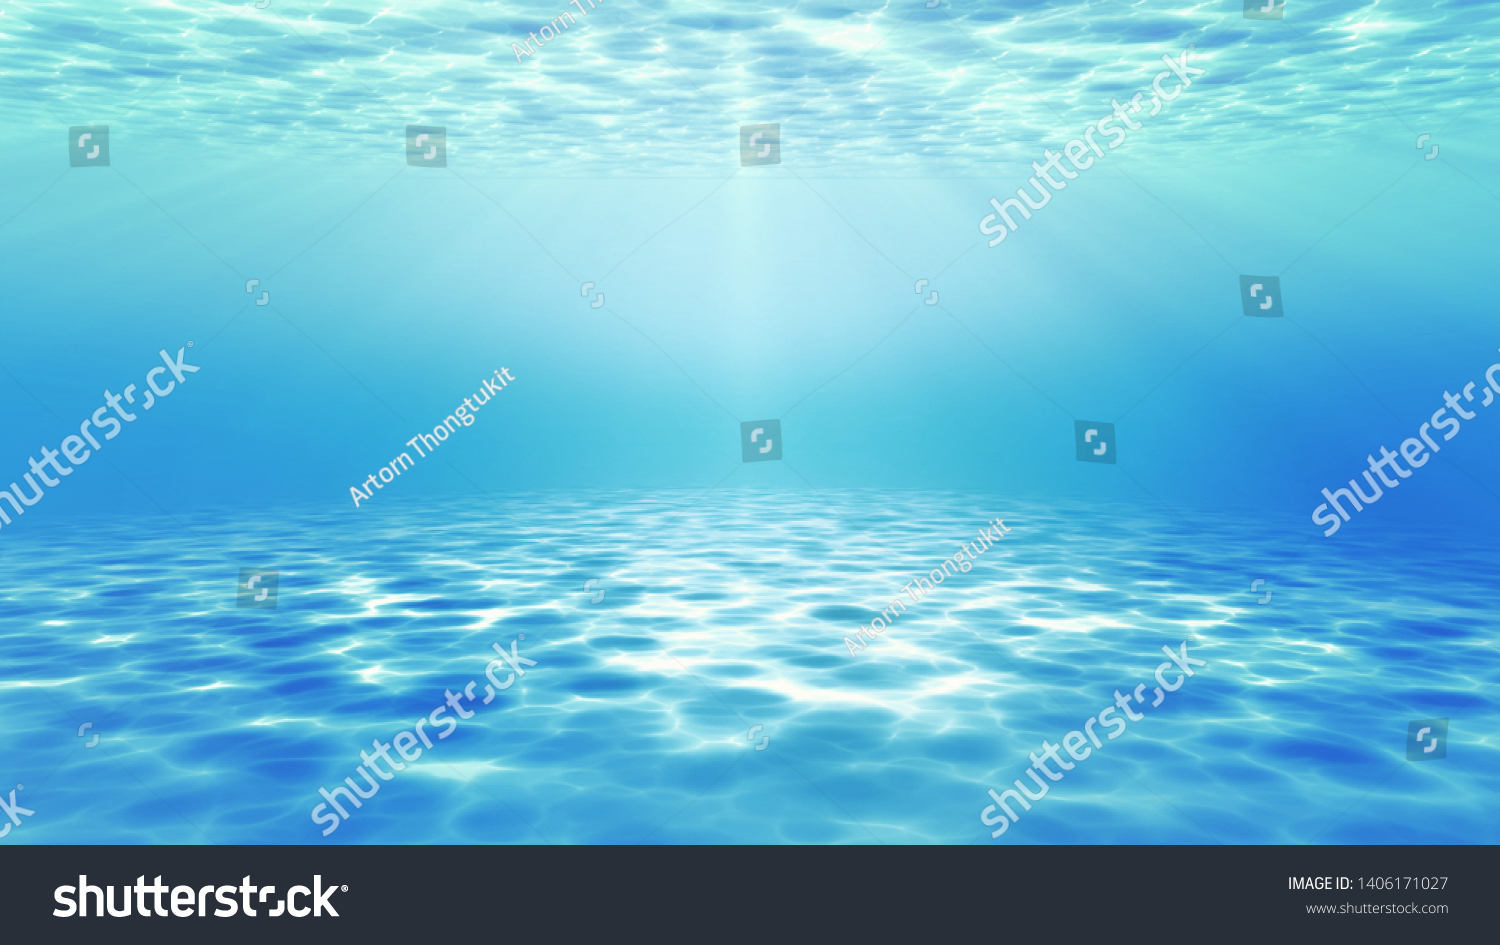 summer time under sea ocean in clean and clear water with ray of sunlight from surface for background concept design #1406171027